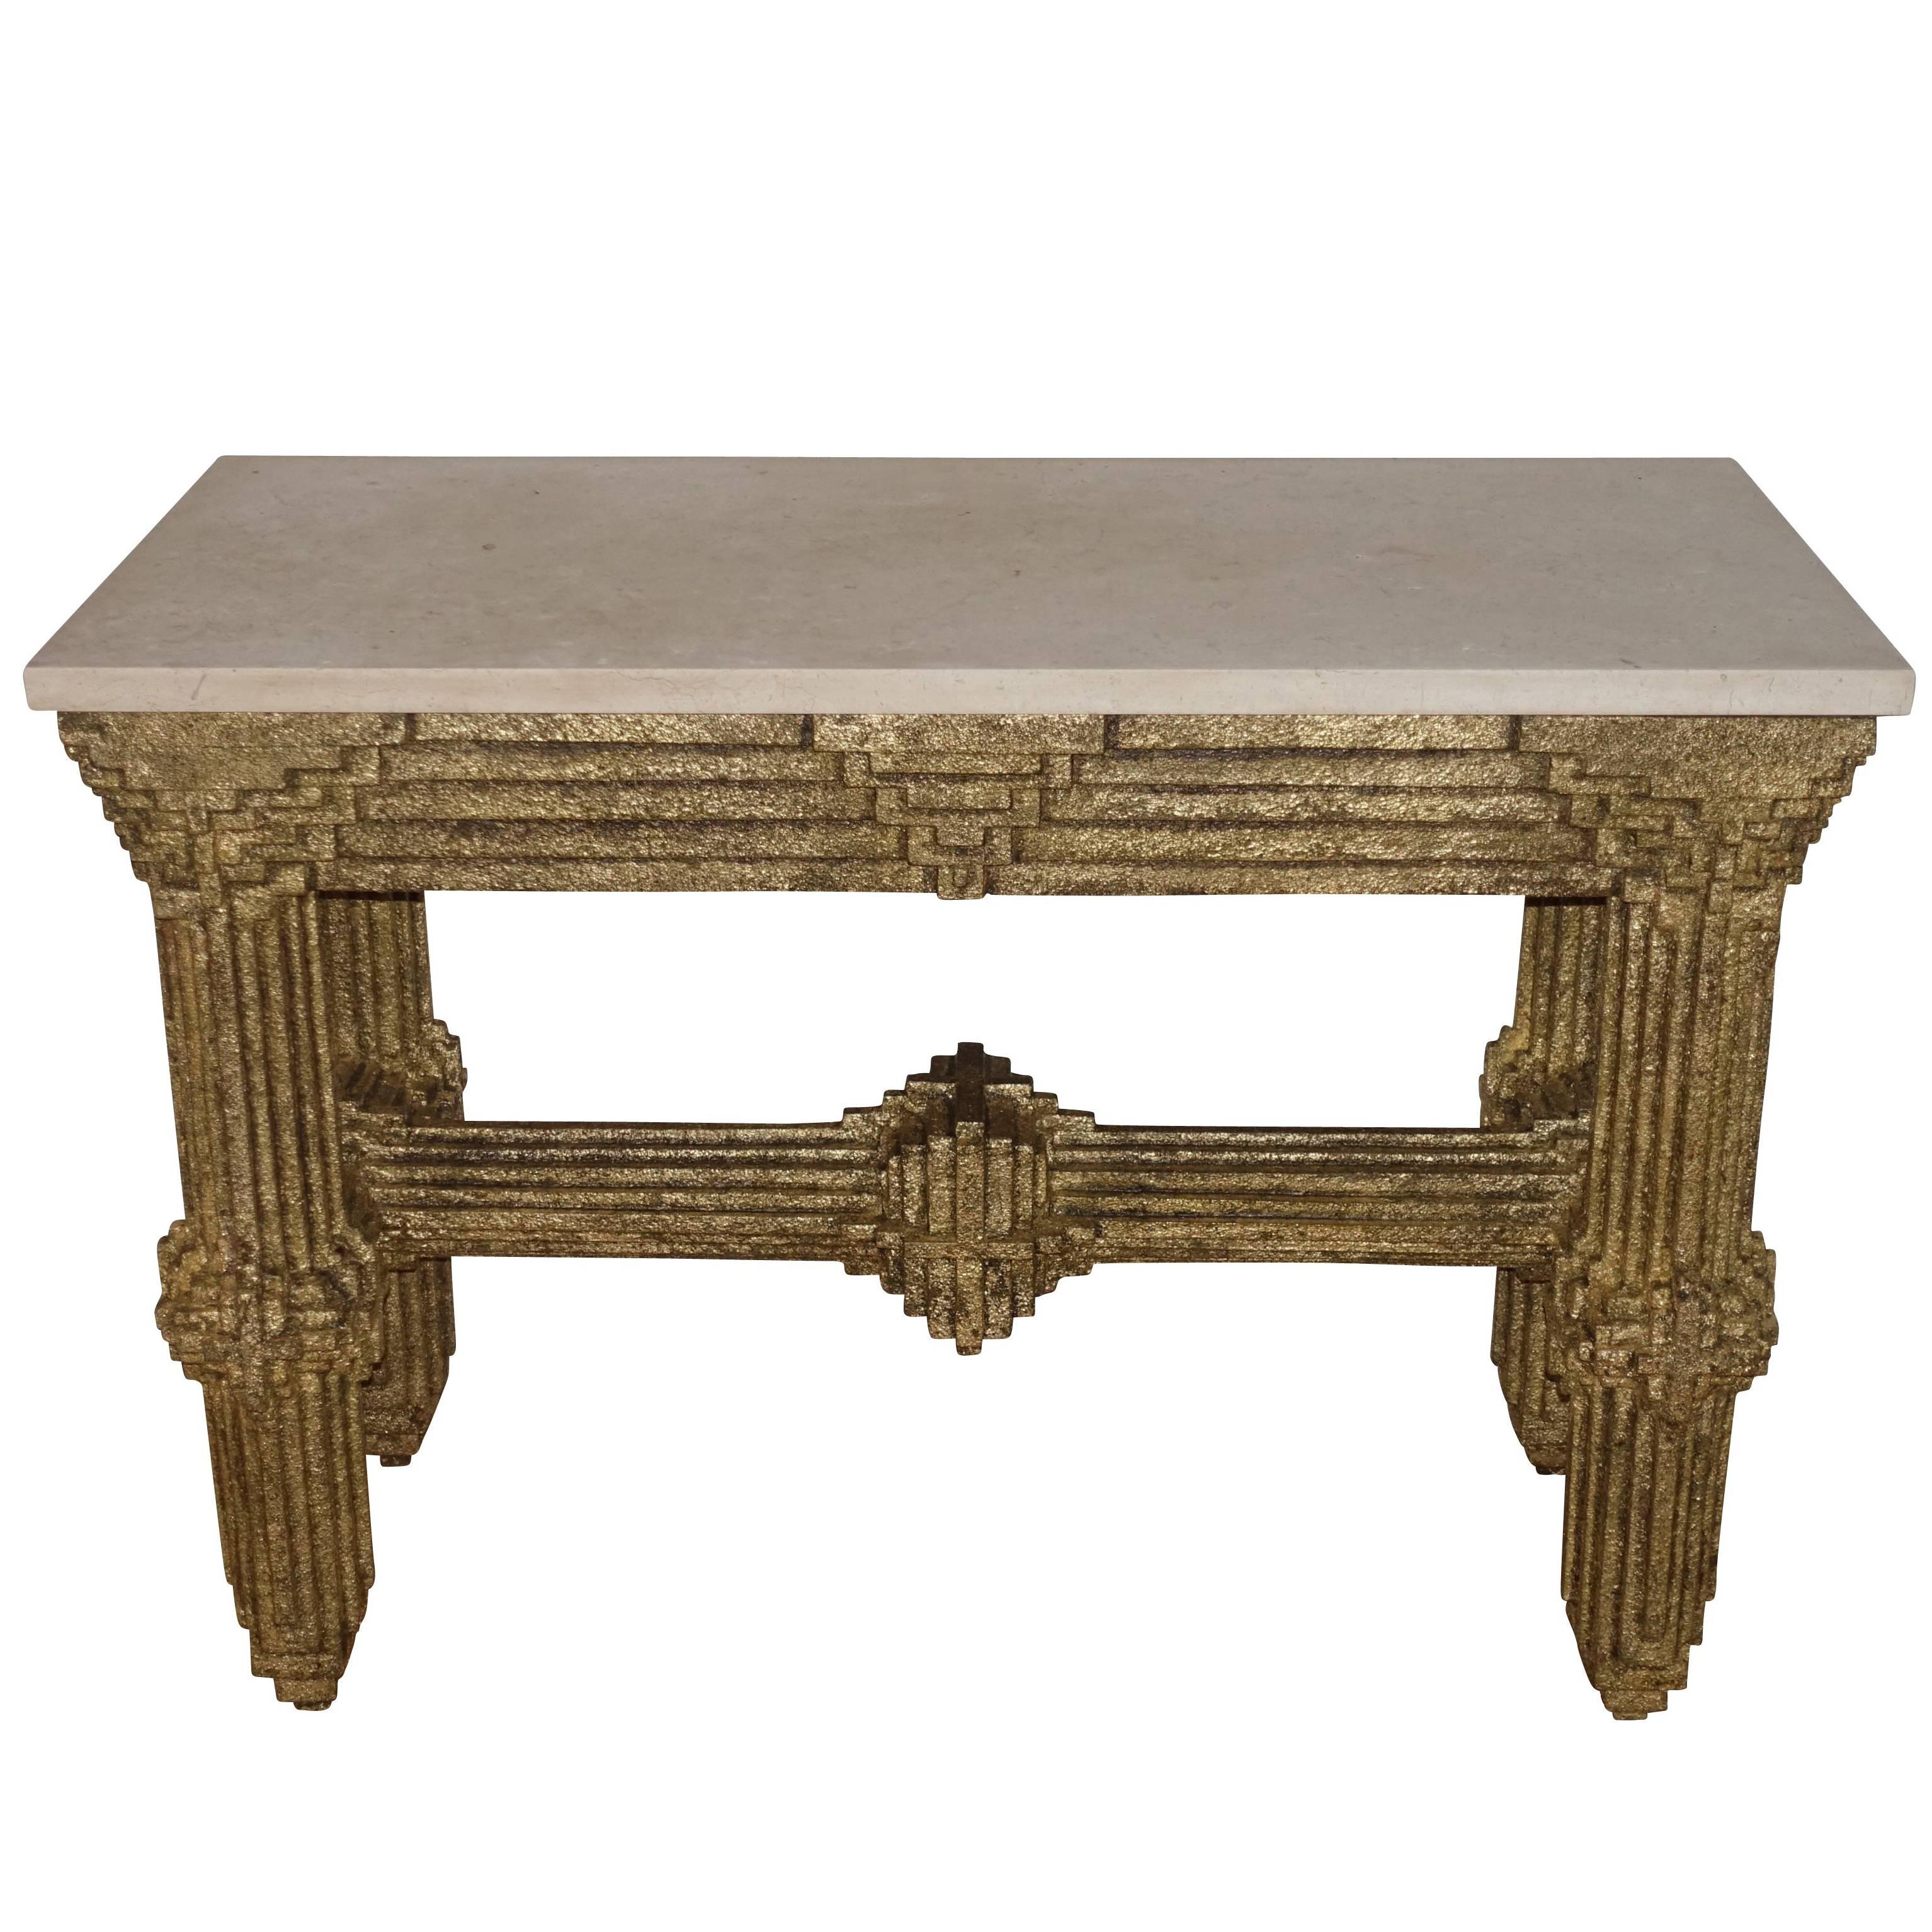 Gold Gilt Multi Layered Wood and Travertine Top Brutalist Console, France, 1950s For Sale